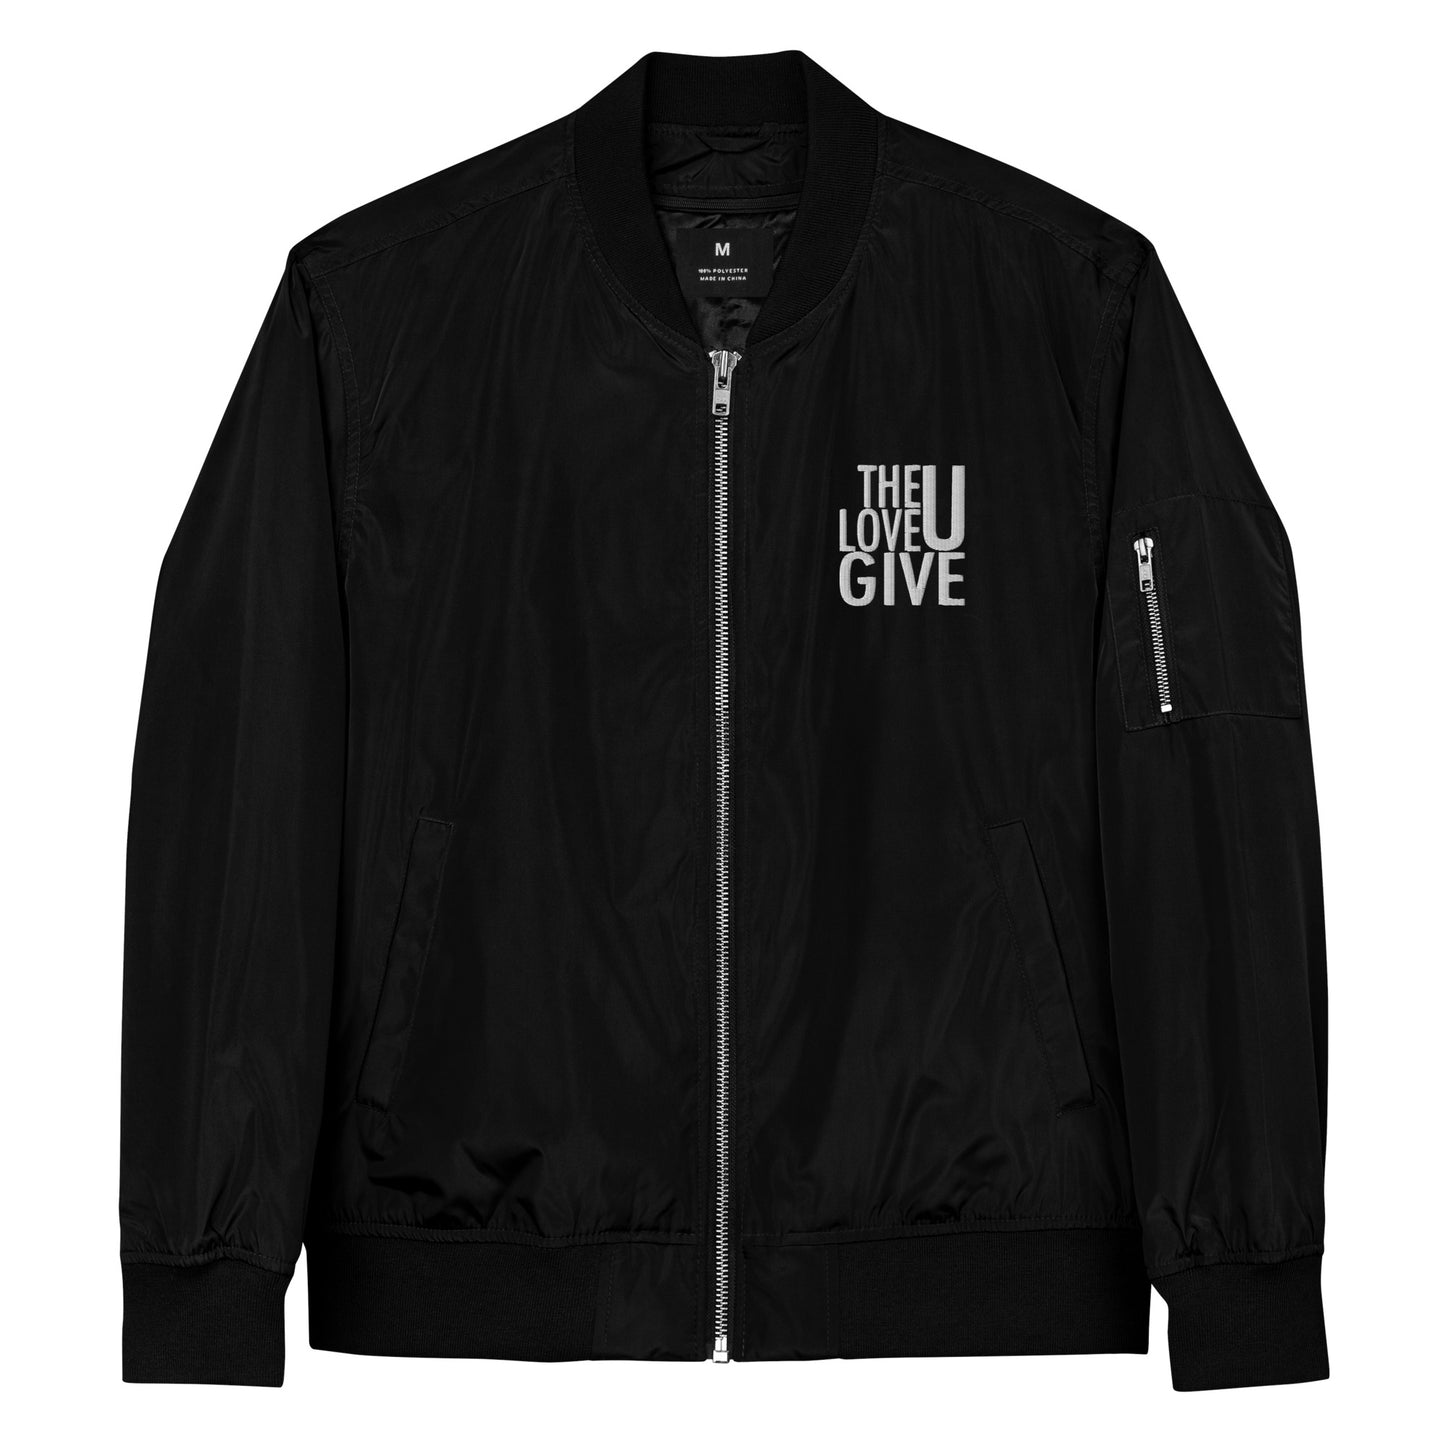 The Love U Give recycled bomber jacket